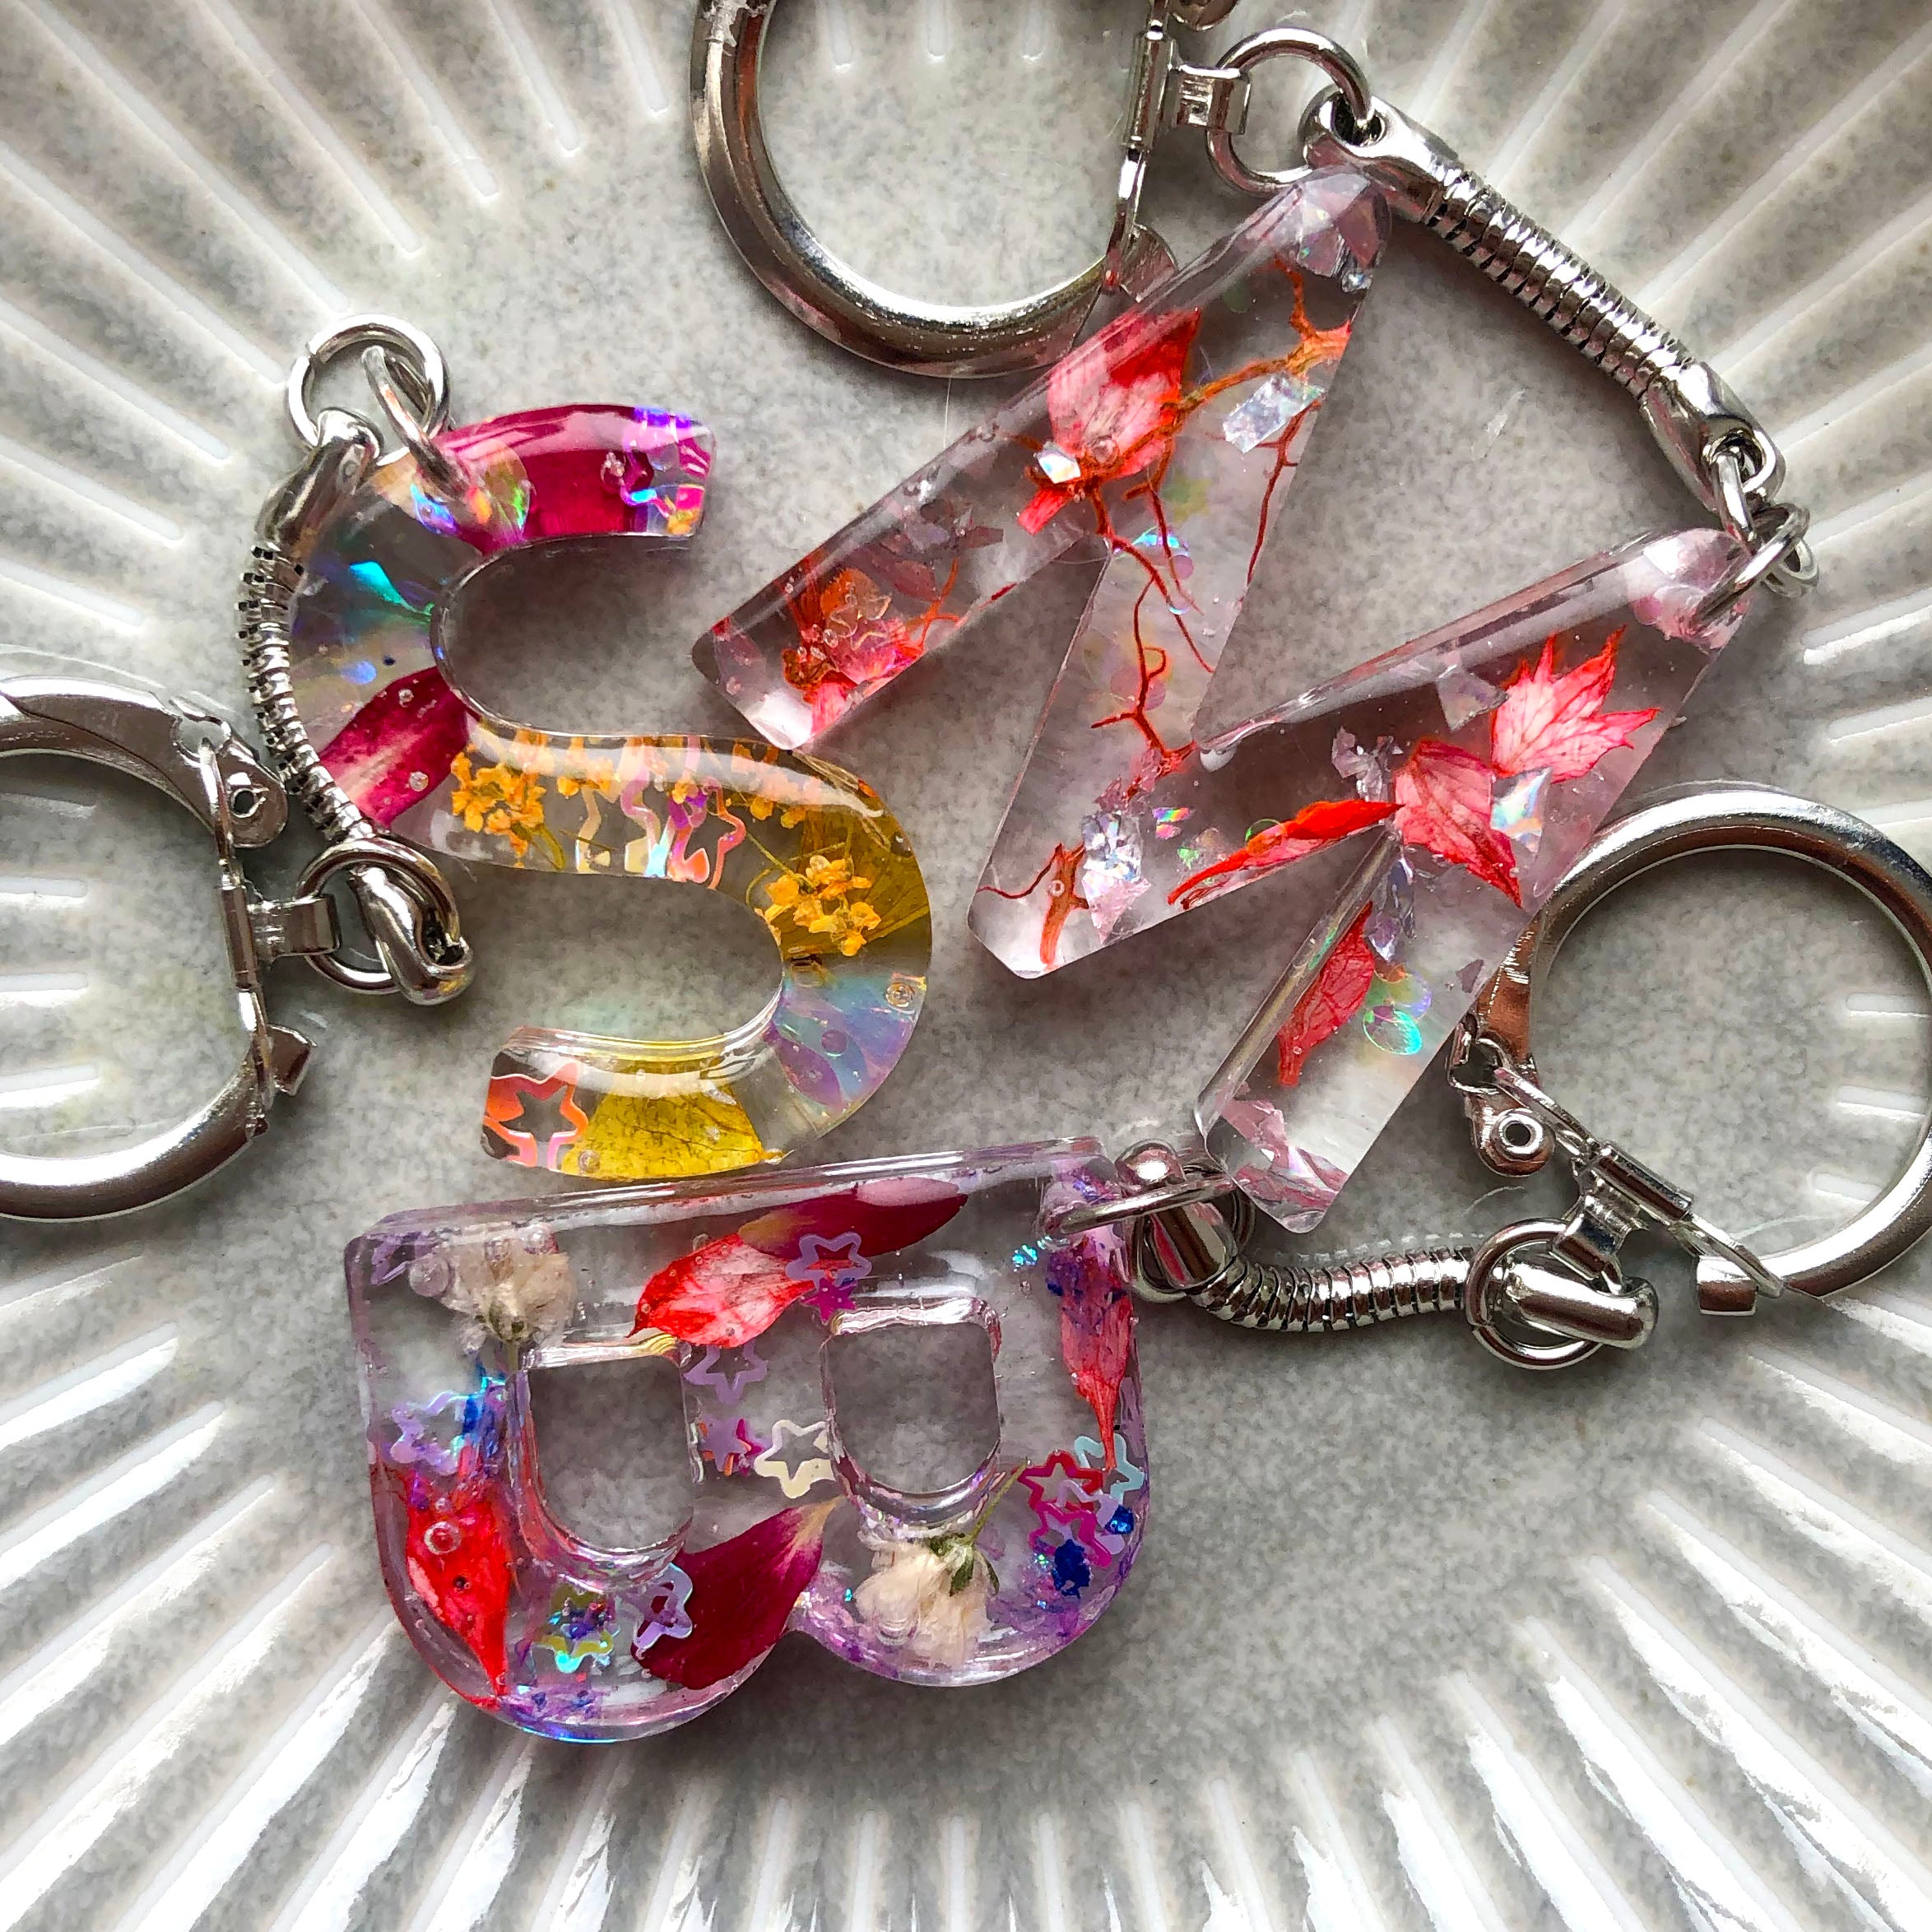 Private Resin Keychain Workshop $28/person